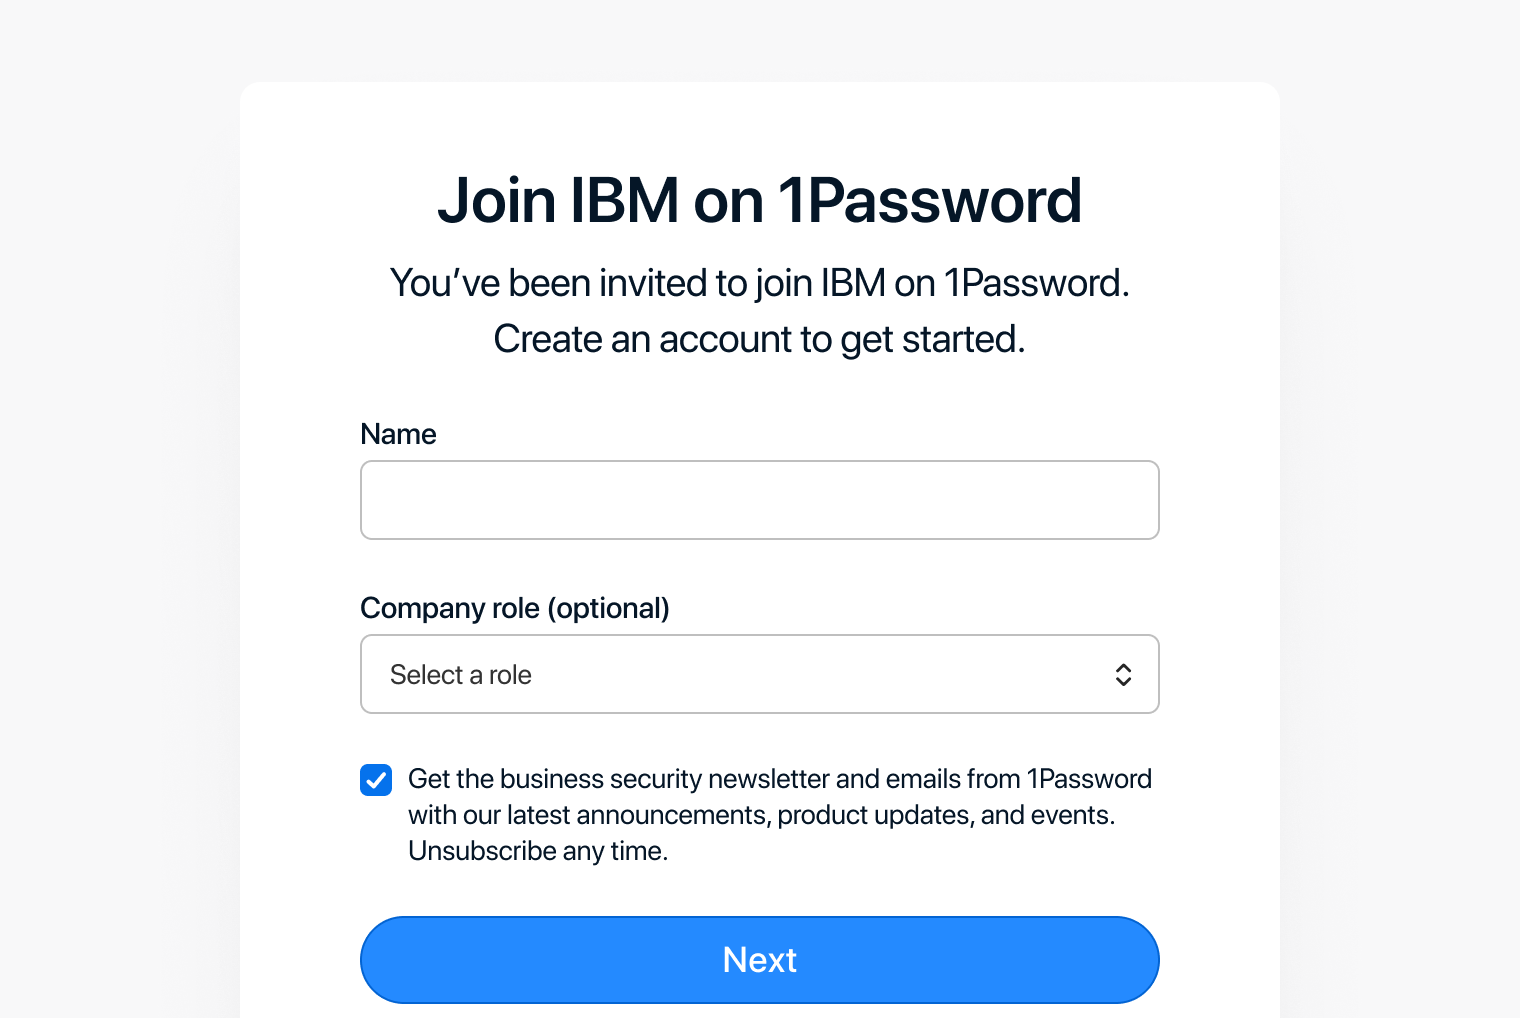 Add your first and last name for your 1Password account